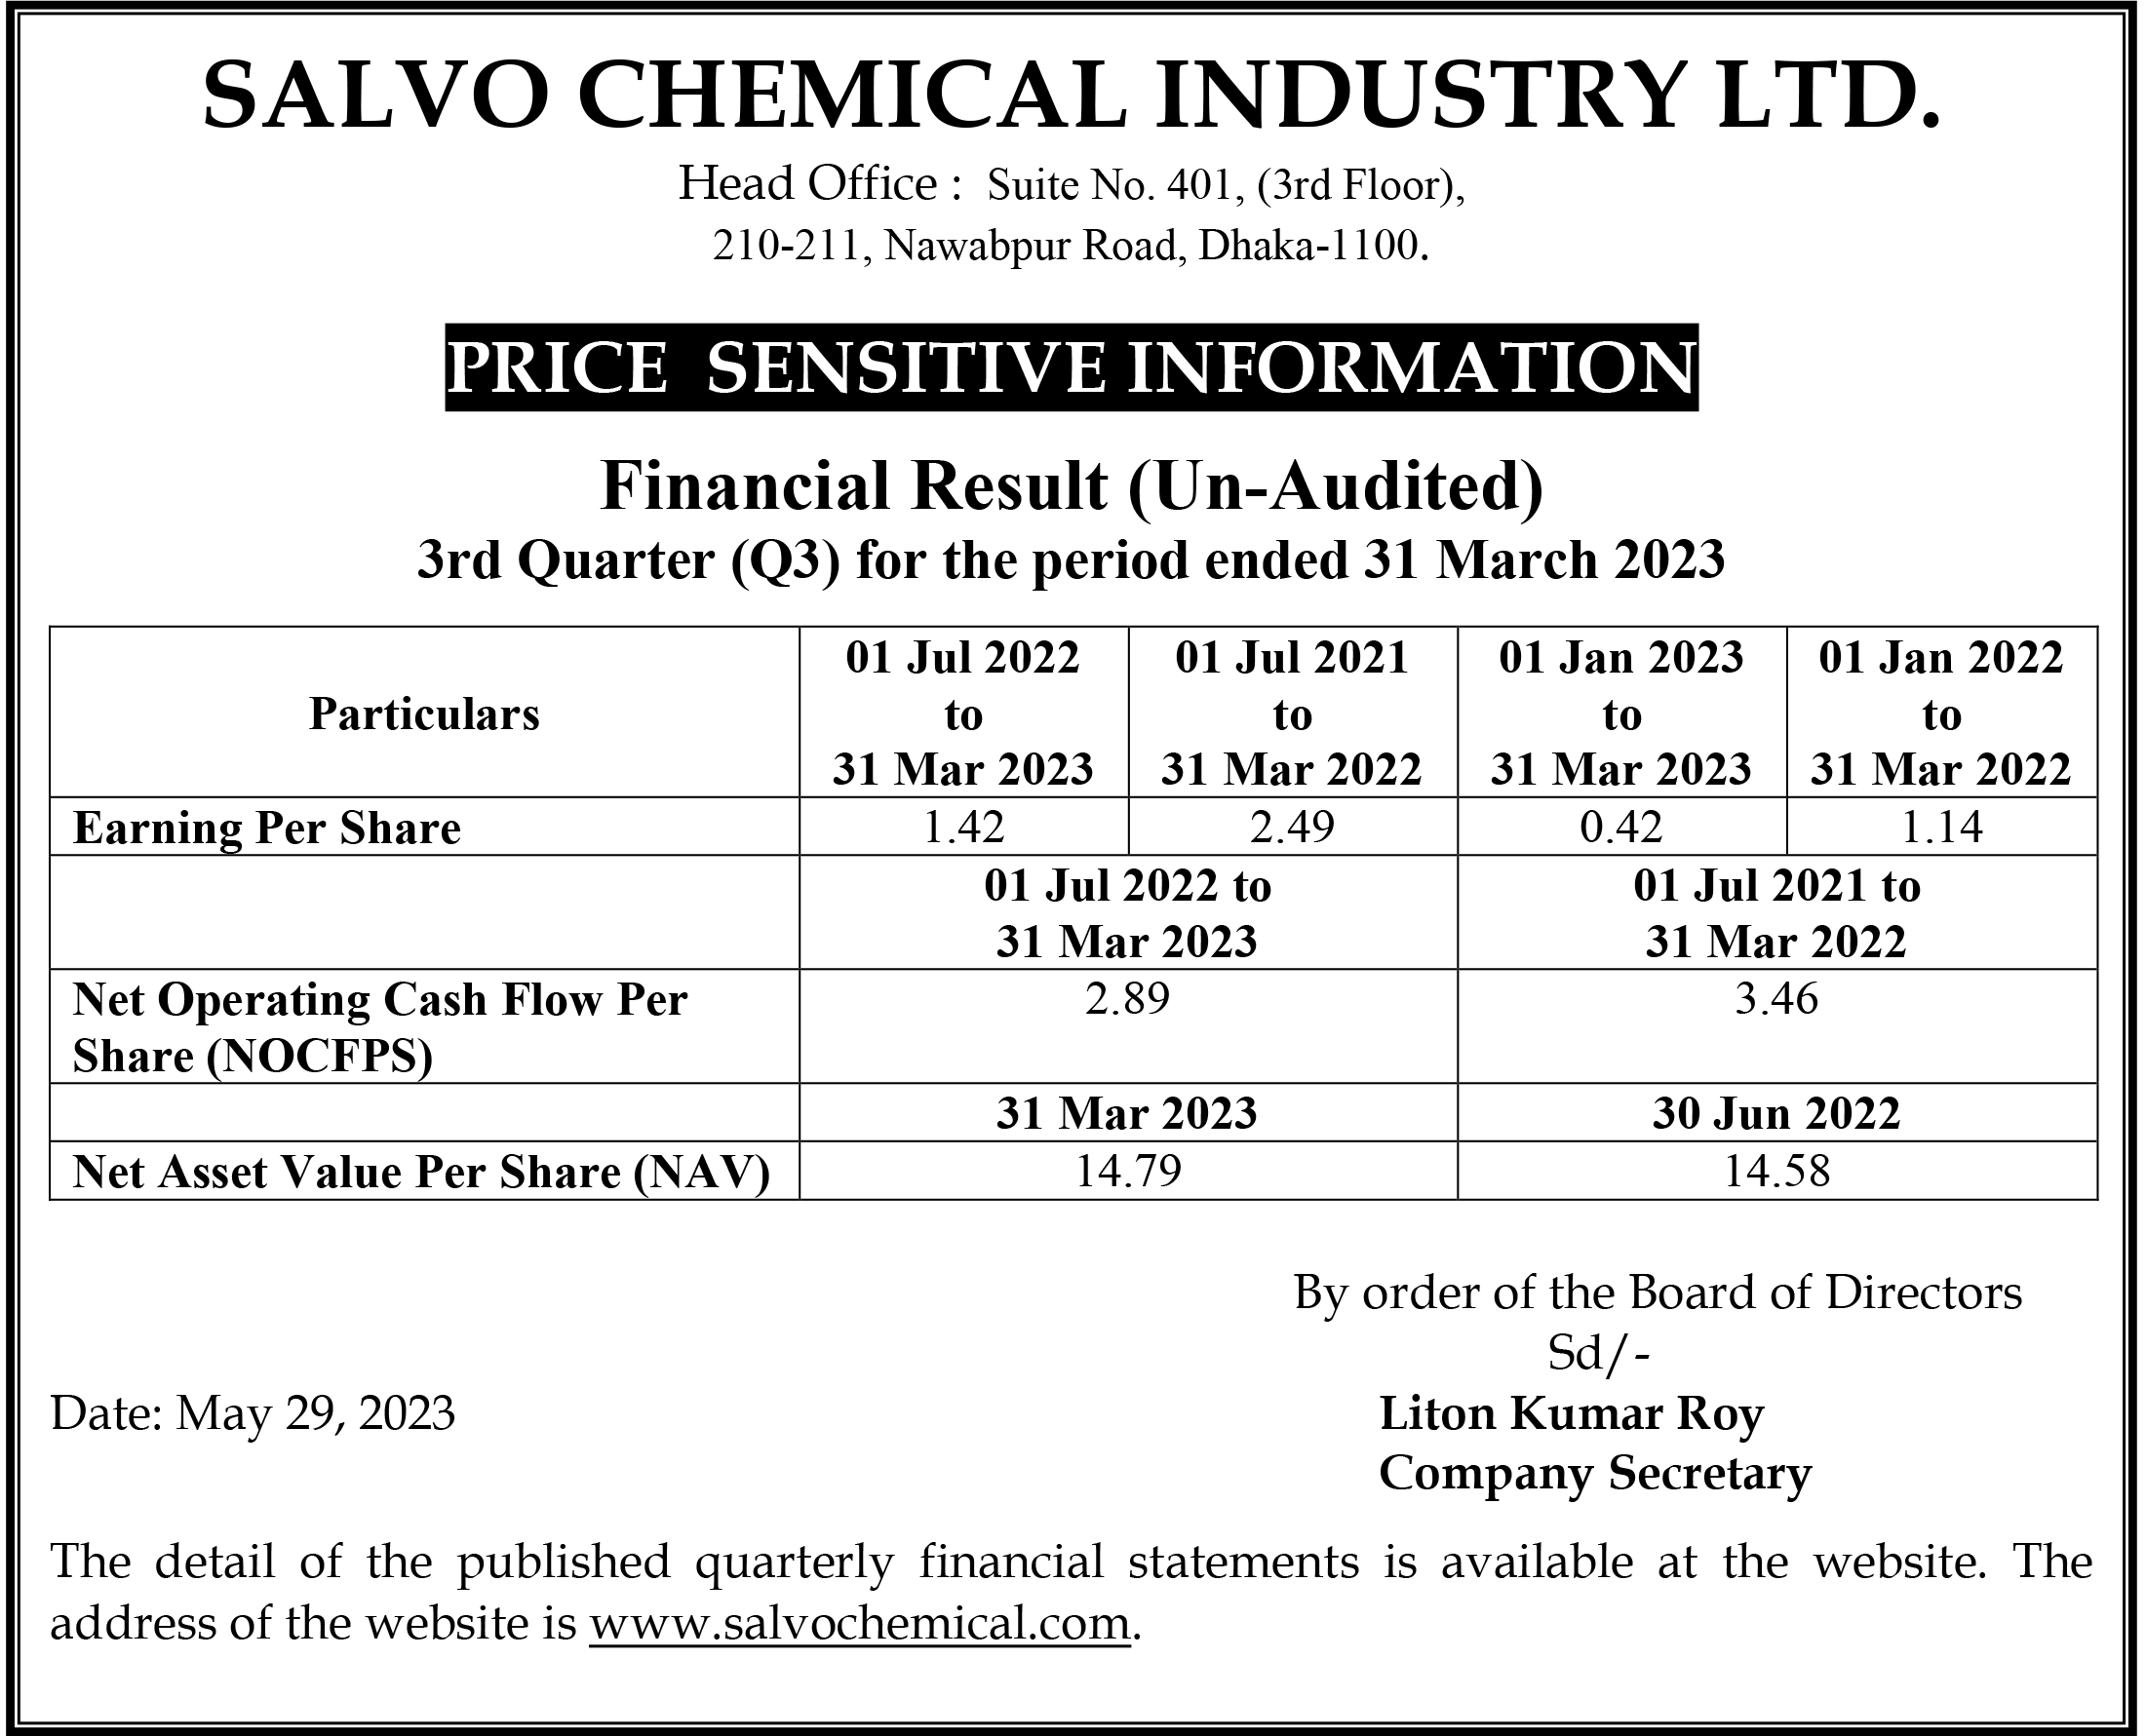 Price Sensitive Information Third-Quarter (Q3) of Salvo Chemical Industry Limited